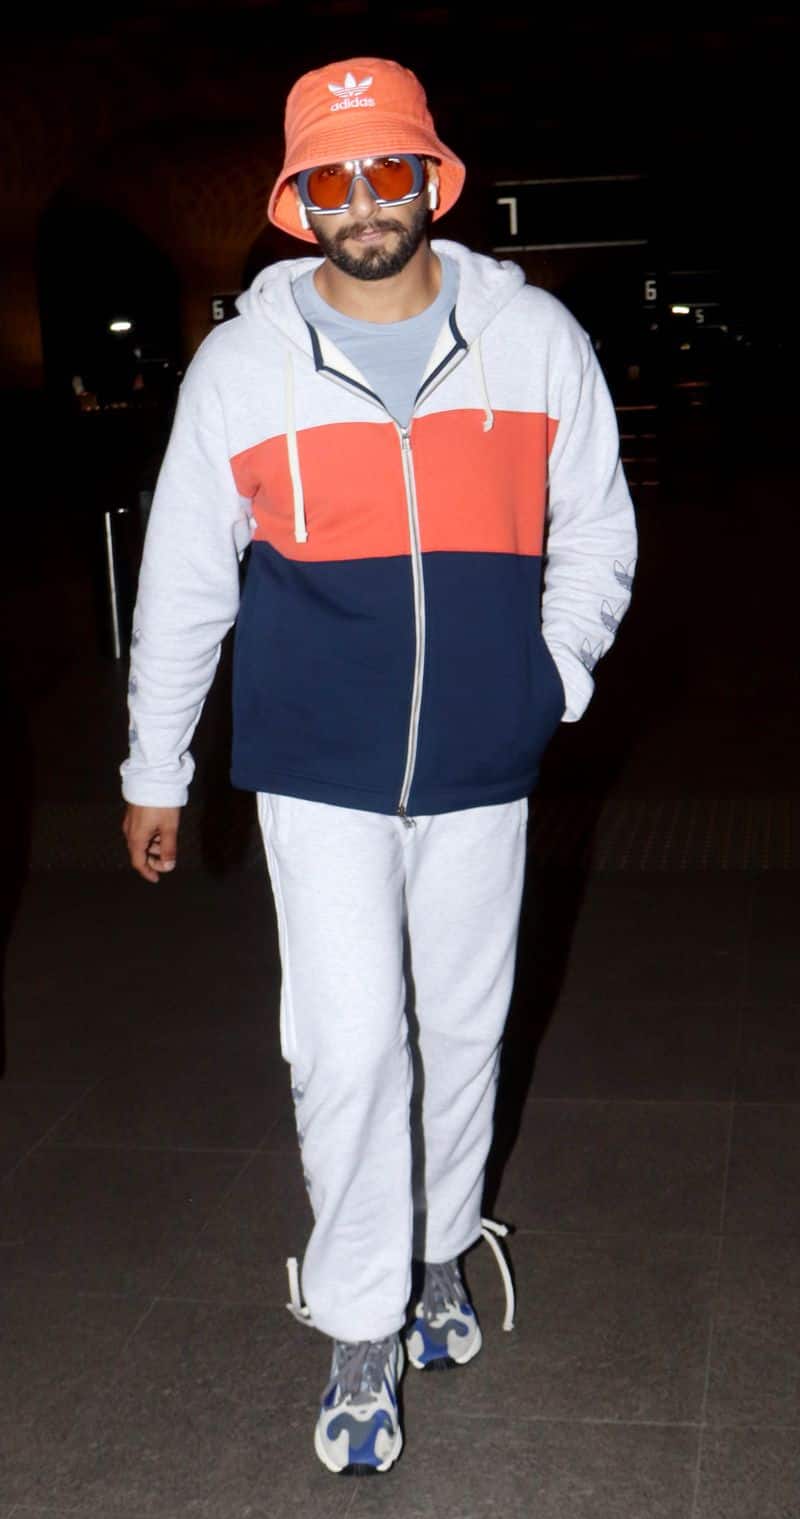 He seems to have one in each colour to go with his athleisure airport tracksuit look.